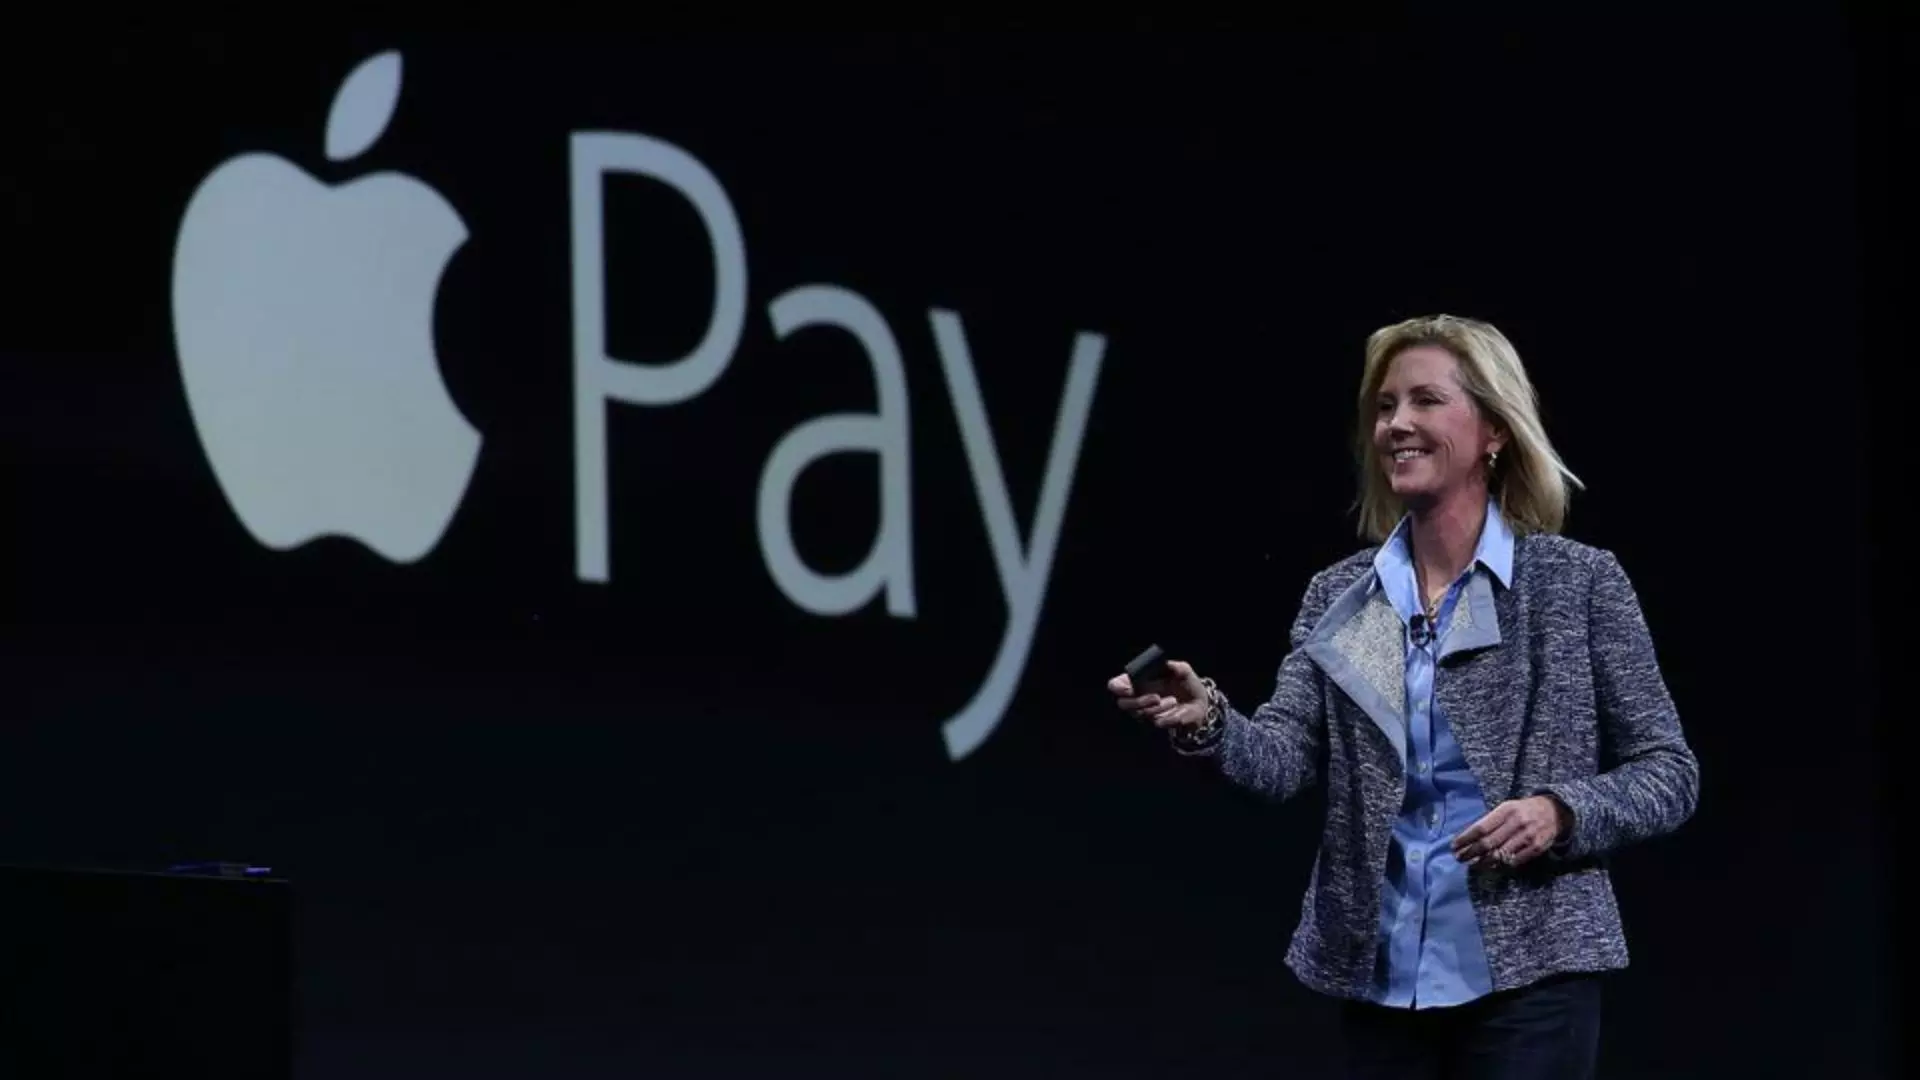 Apple Company Announced Apple Pay Later For The Apple Customers